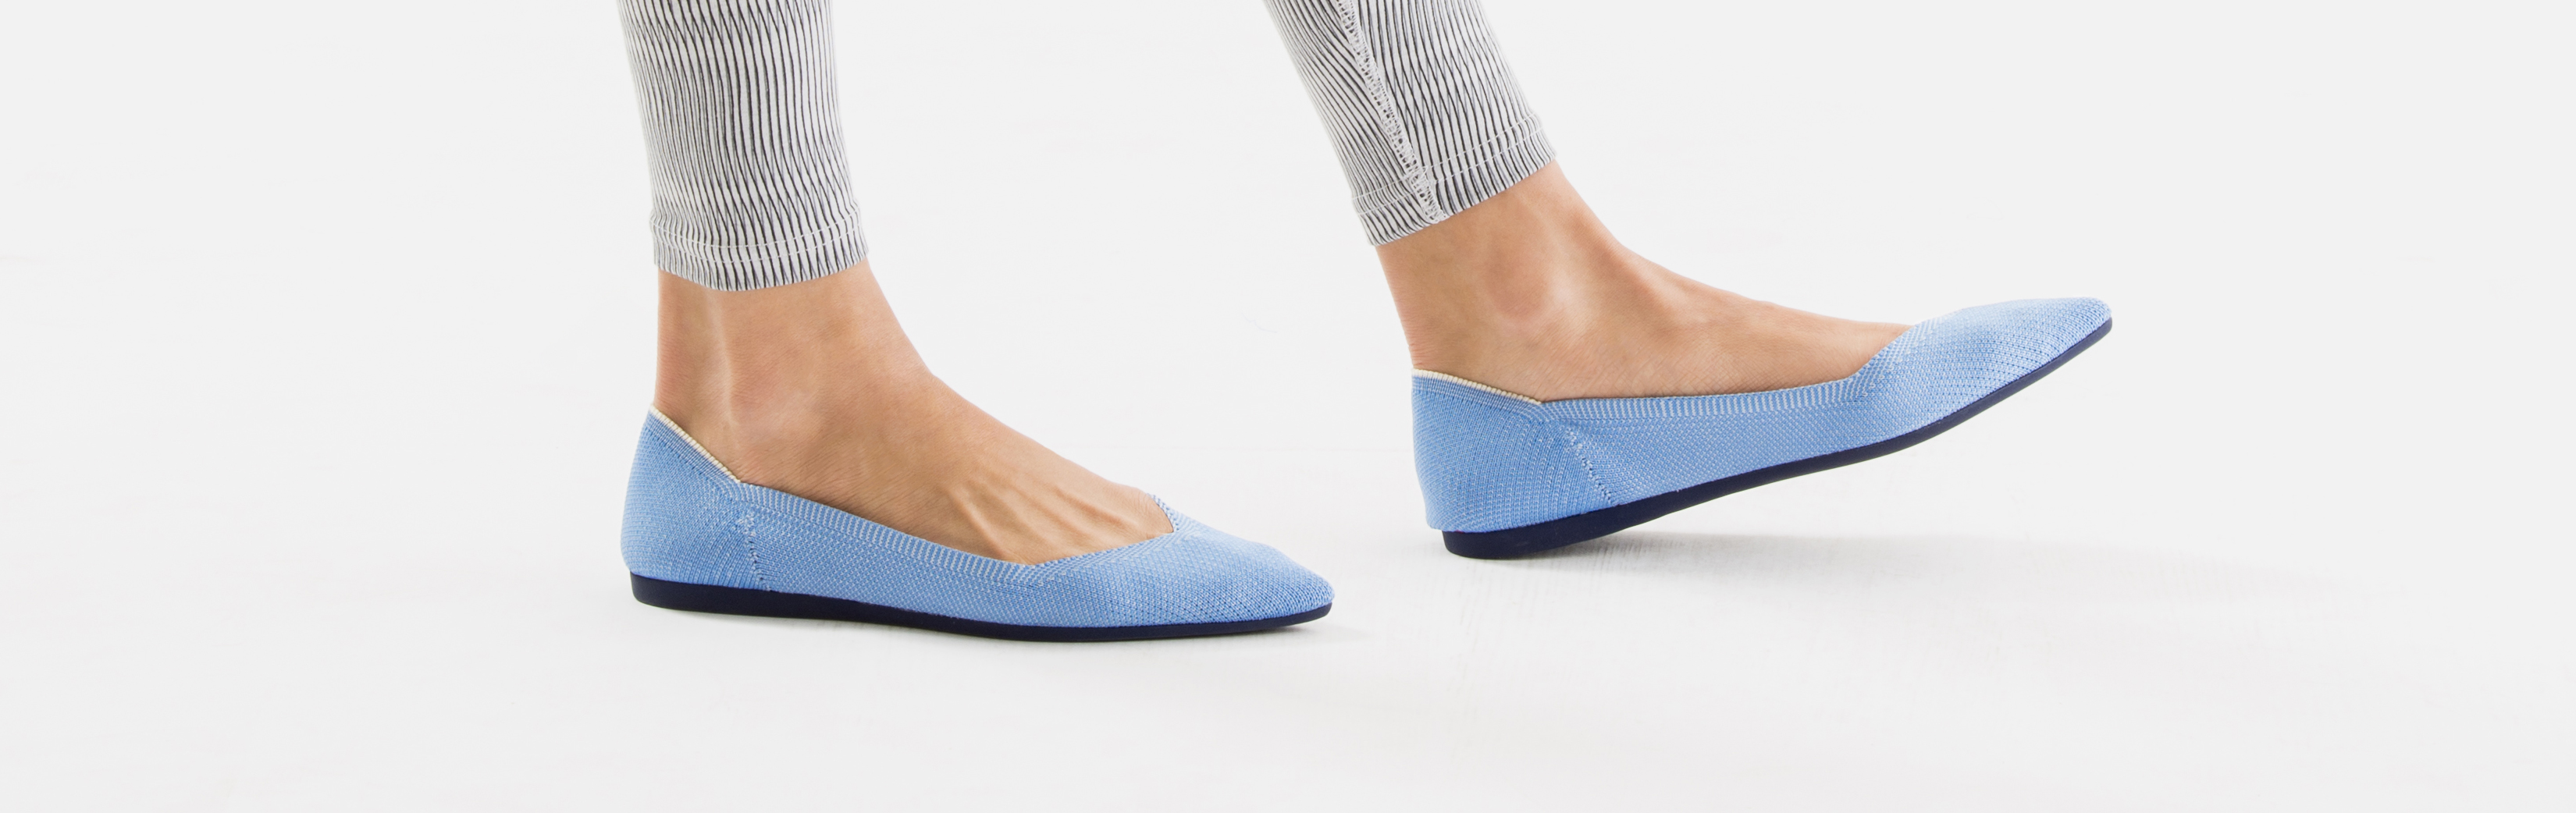 7 Slip-on Shoes for Speeding Through Security3300 x 1042